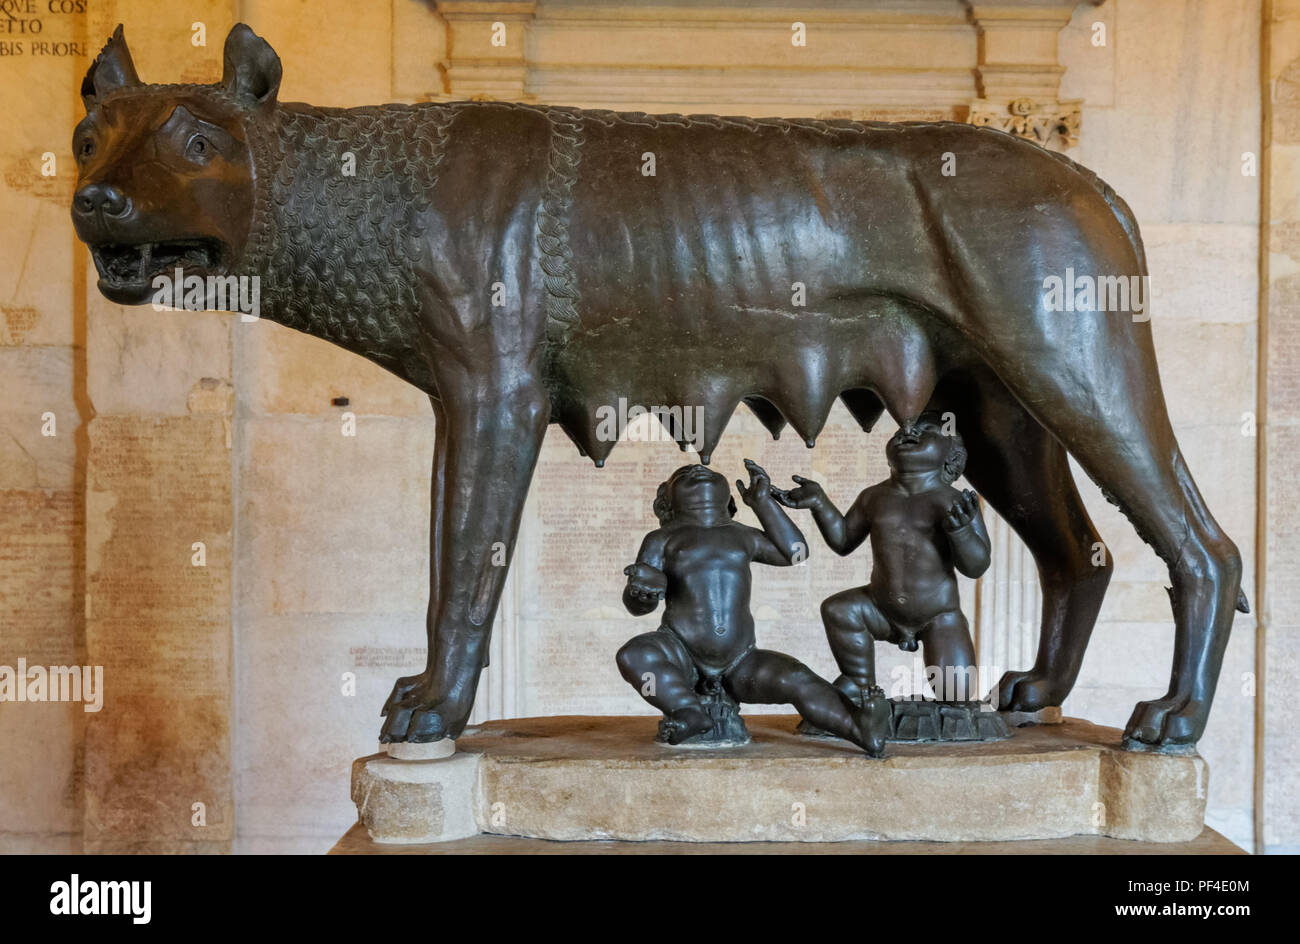 The Capitoline Wolf bronze sculpture in the Capitoline Museums, Rome, Italy Stock Photo